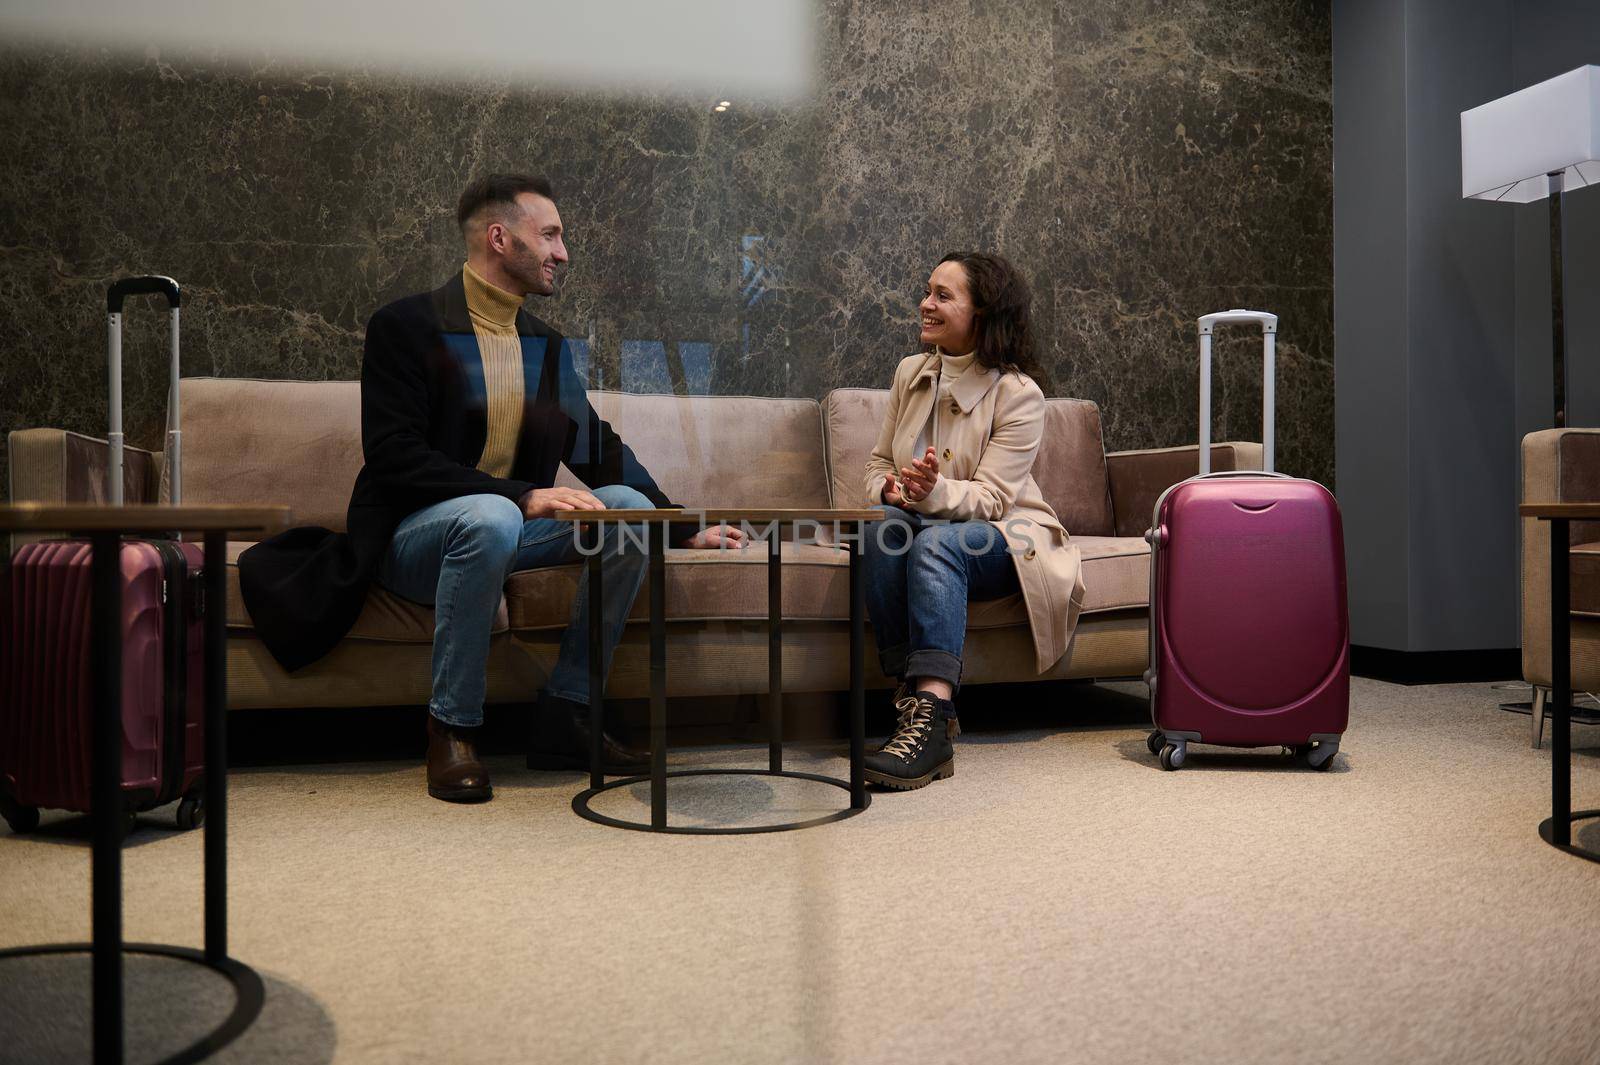 Married couple with suitcases, partners on a business trip discussing plans and projects in a VIP lounge meeting room while waiting for flight in the airport departure terminal by artgf